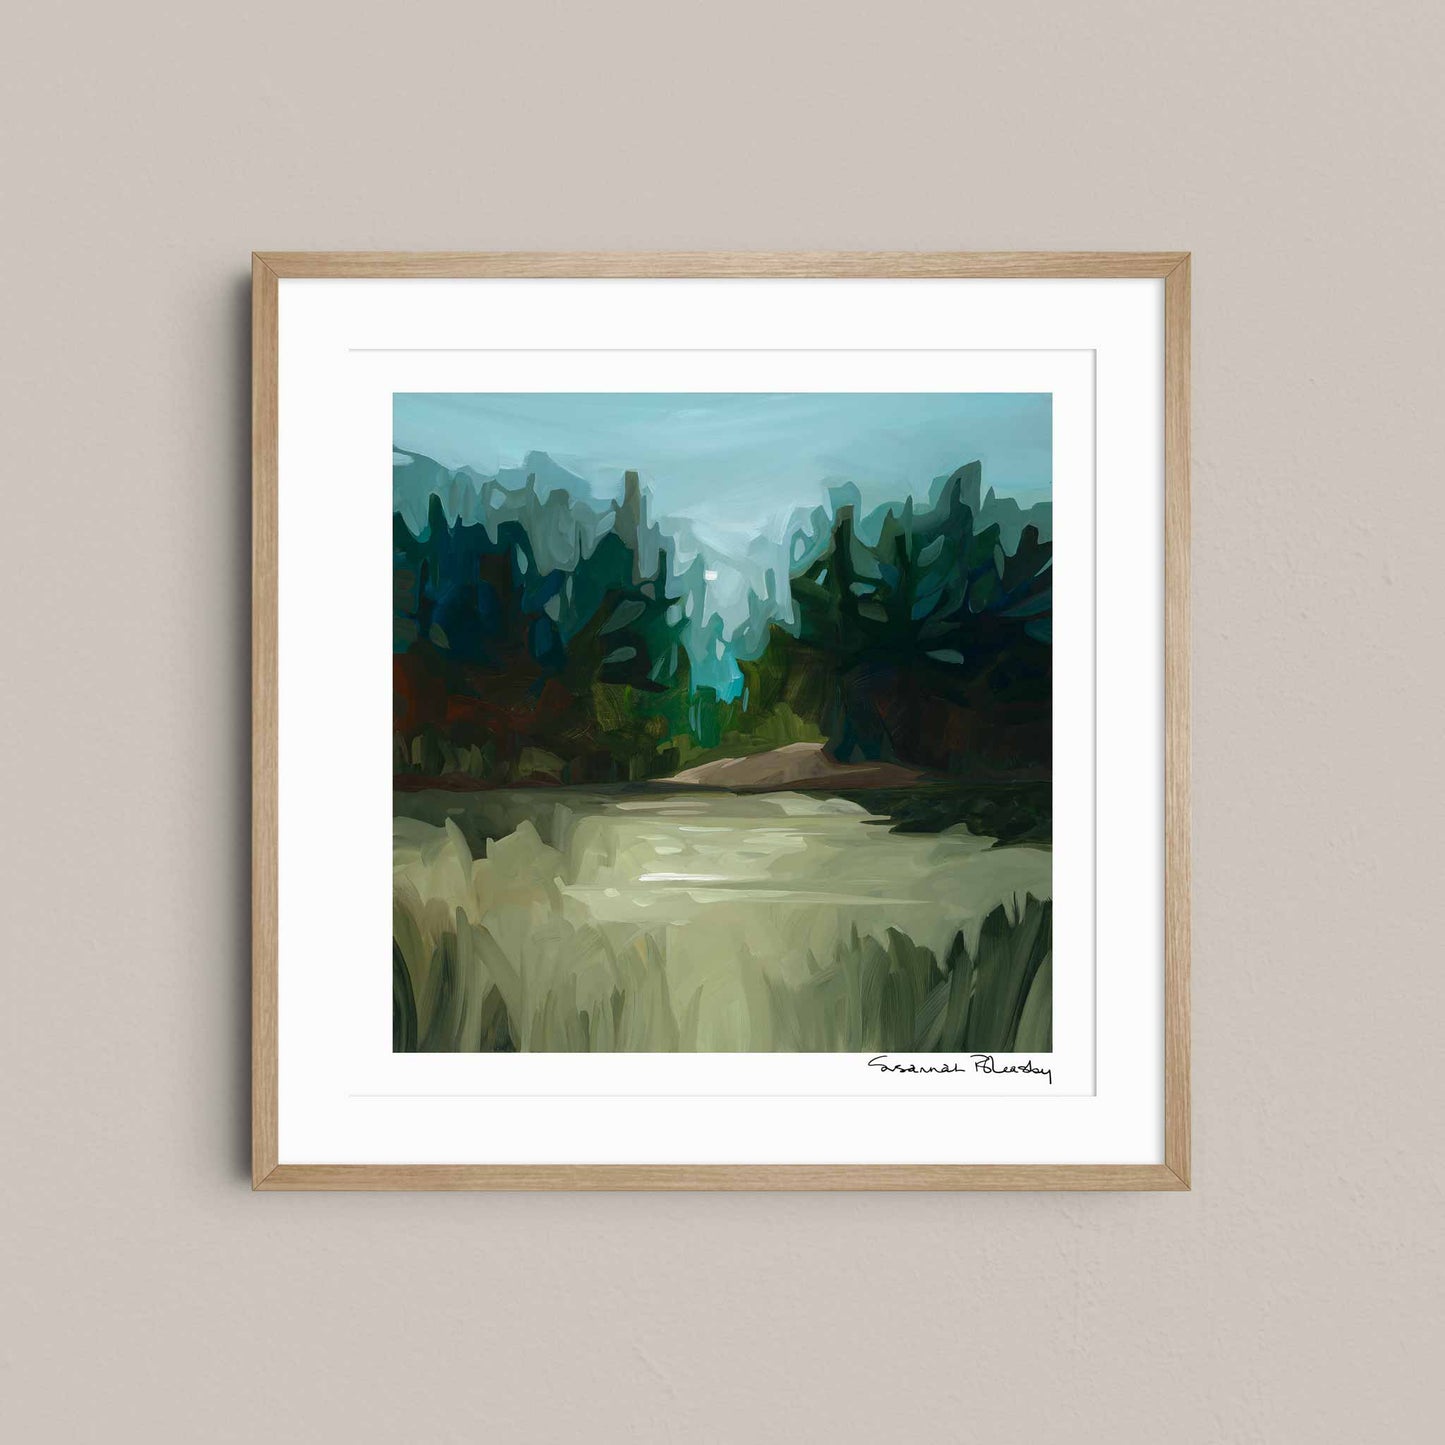 Experience the tranquil energy of nature with â€˜Pinecrestâ€™, an abstract landscape art print of an acrylic forest painting.